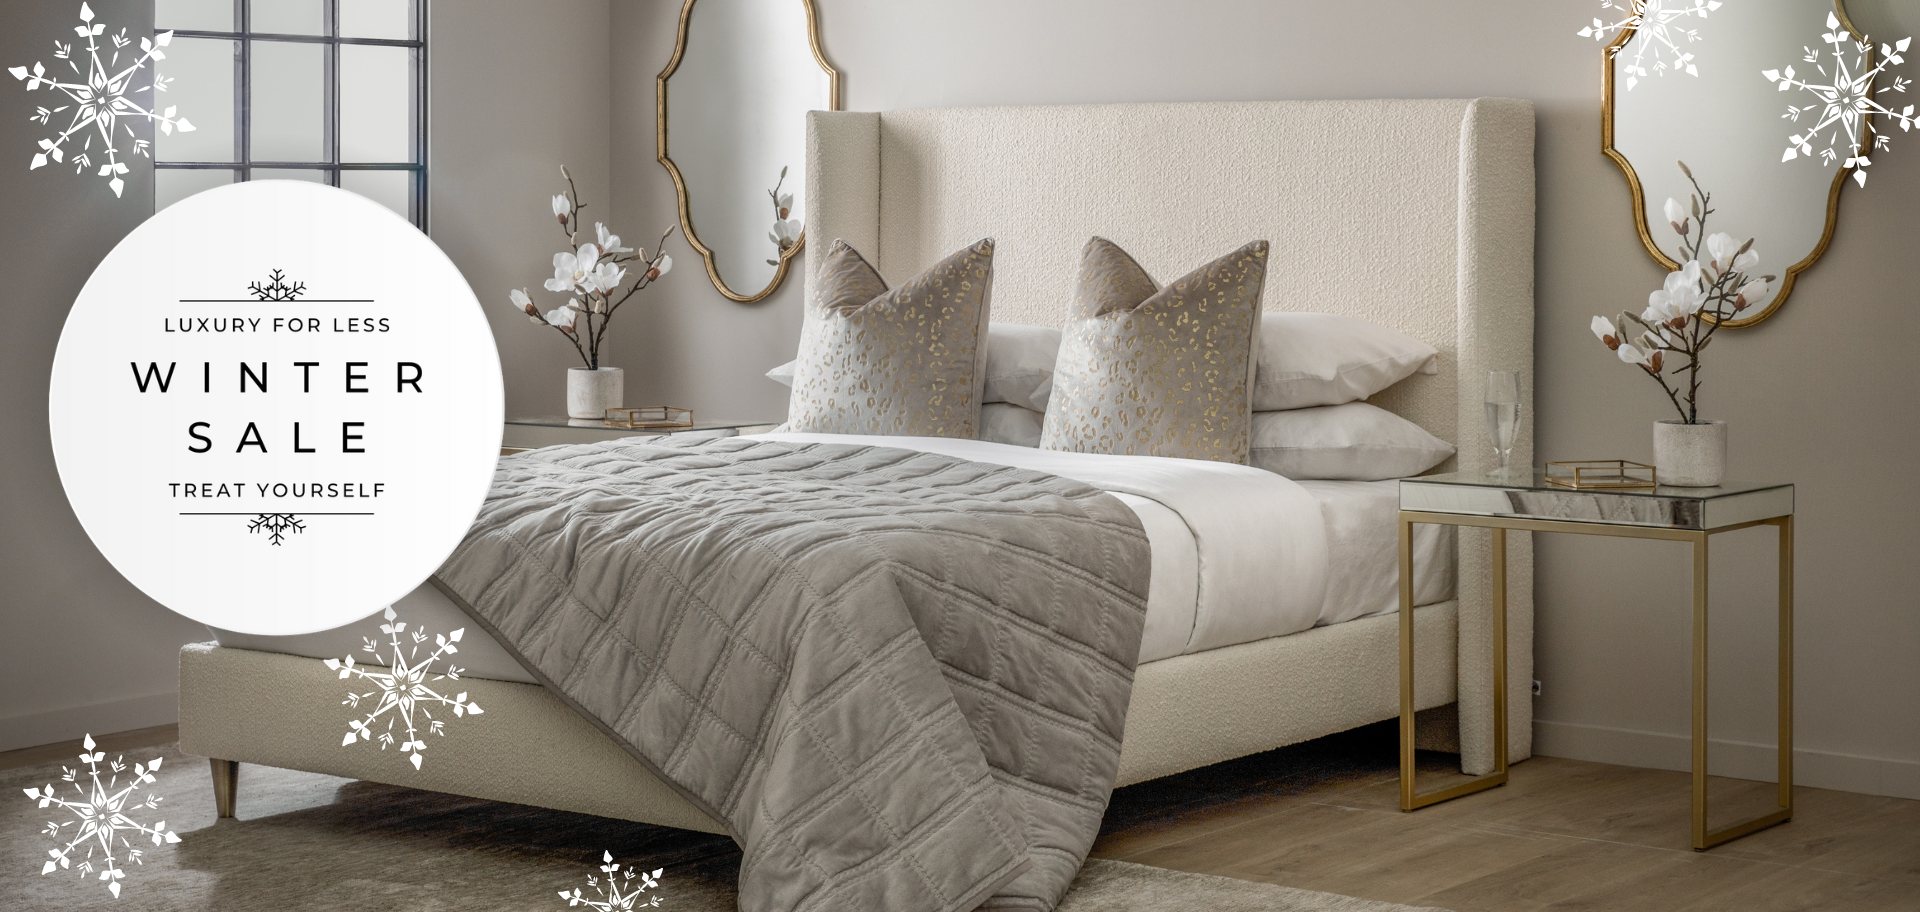 Relax & Recline on our Upholstered Bed Frames